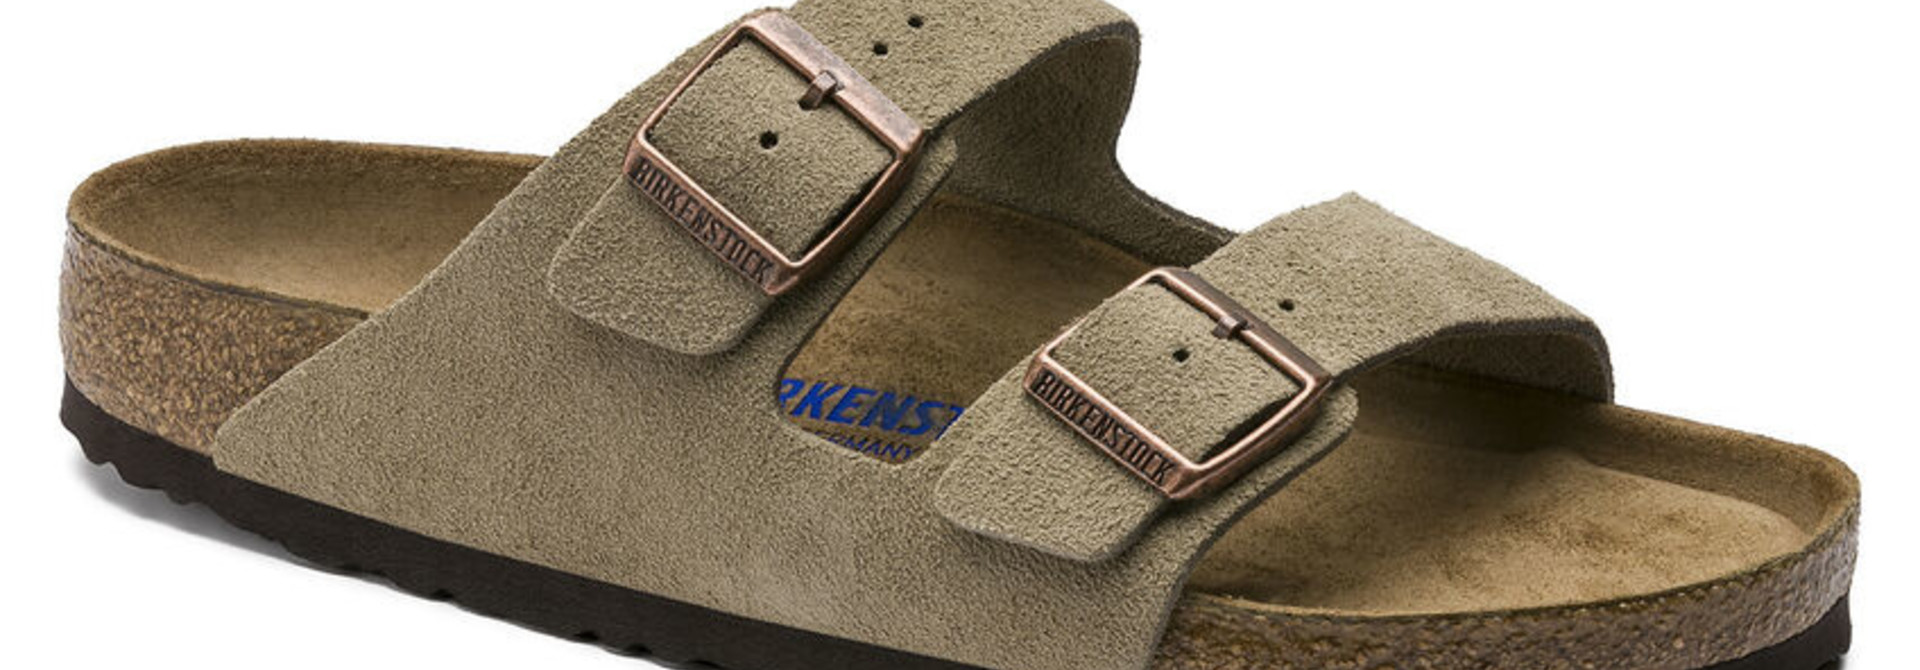 Arizona, Soft FootBed, Suede Leather/Taupe